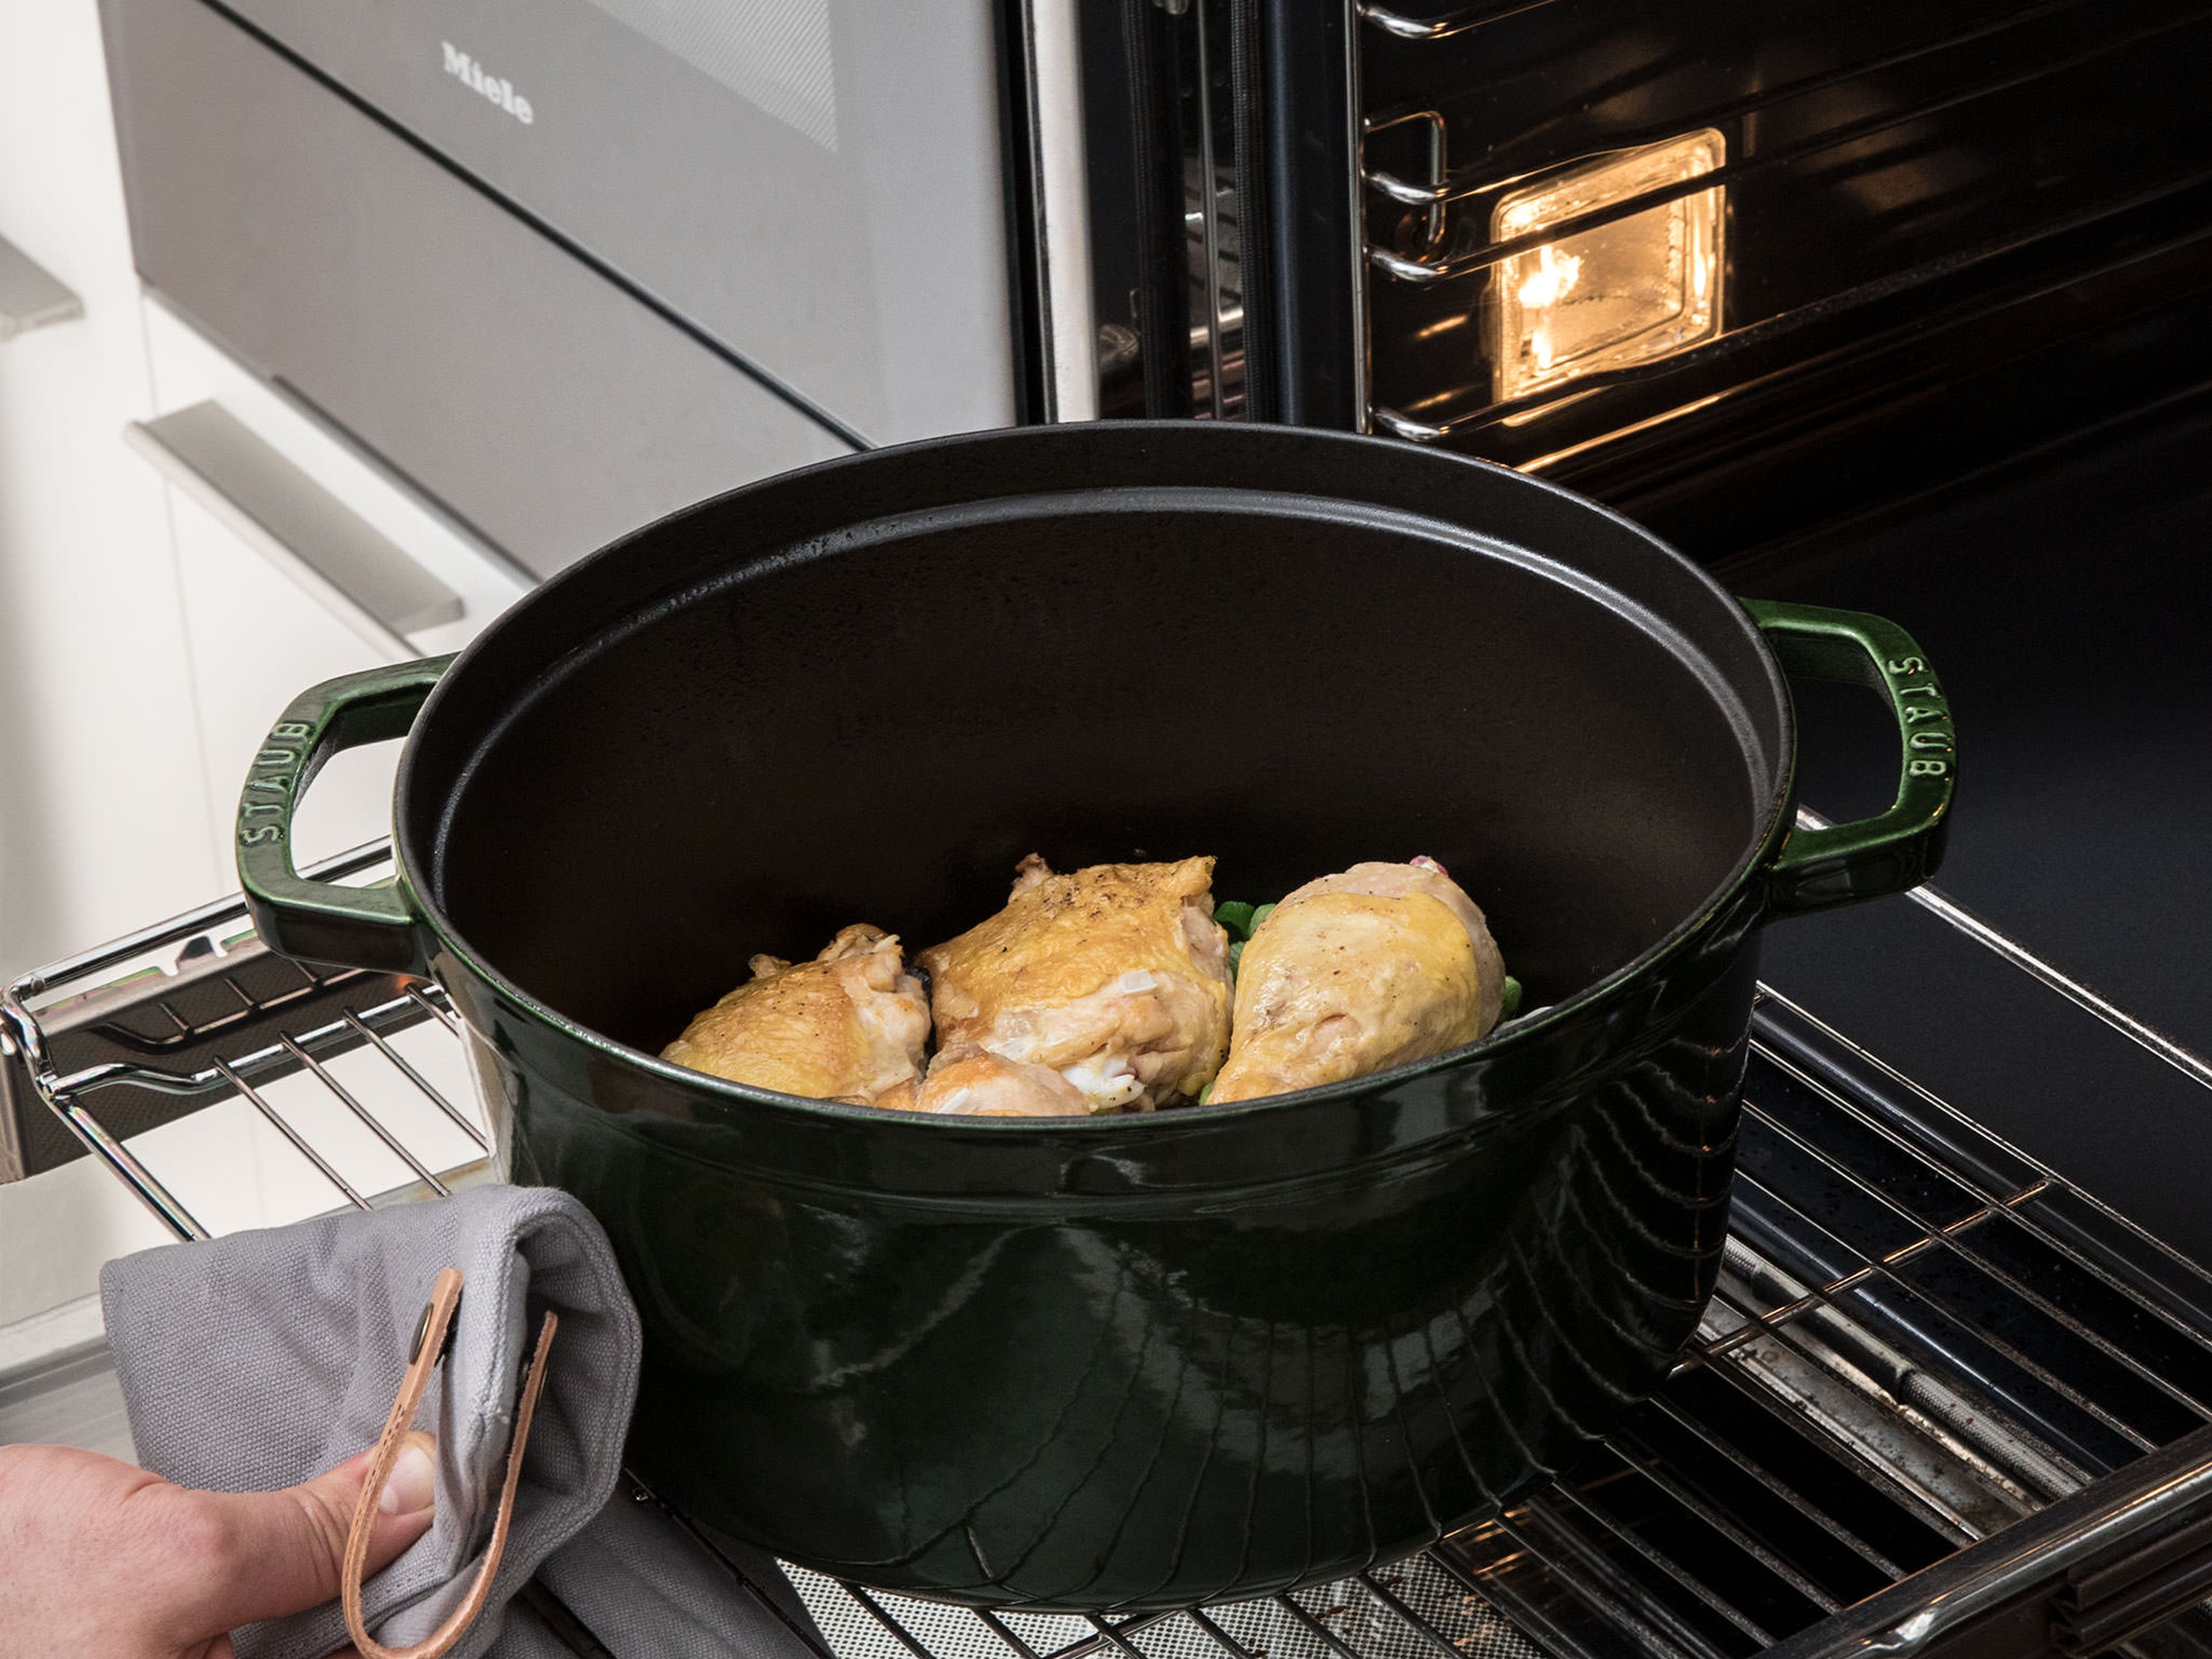 Transfer the pot to the preheated oven and roast the chicken at 220°C/425°F for approx. 15 min. or until chicken is cooked through.